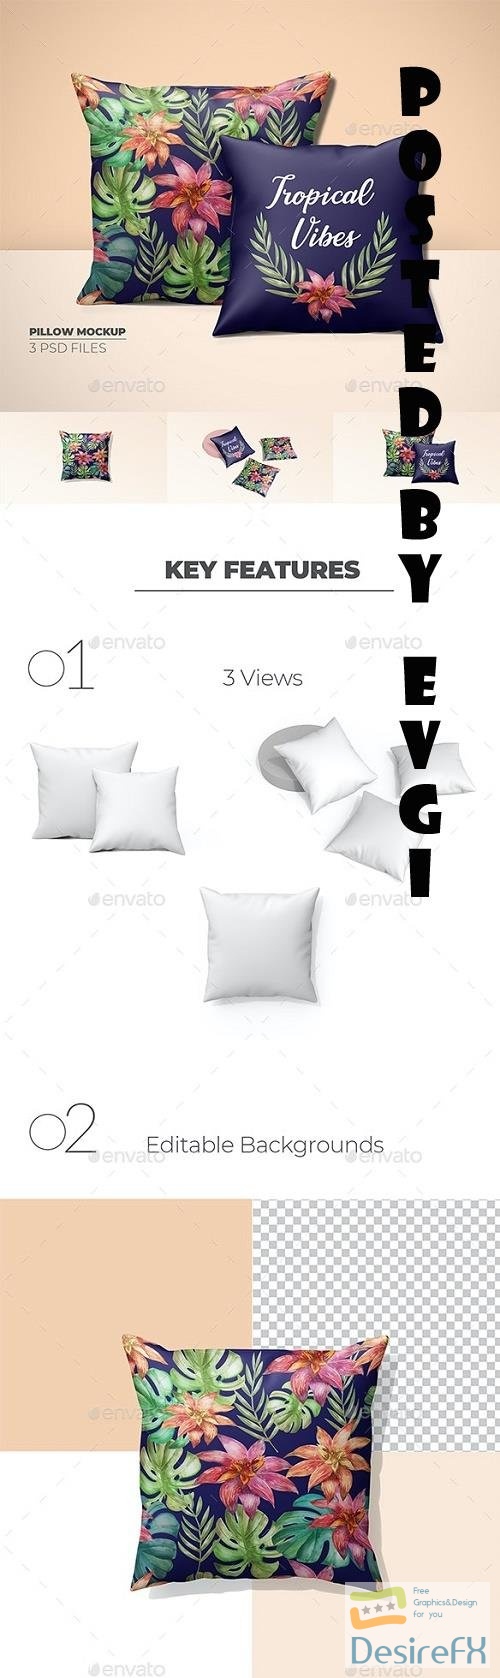 GraphicRiver - Silk Cushion/Pillow Cover Mockups - 34274475 - 6888047